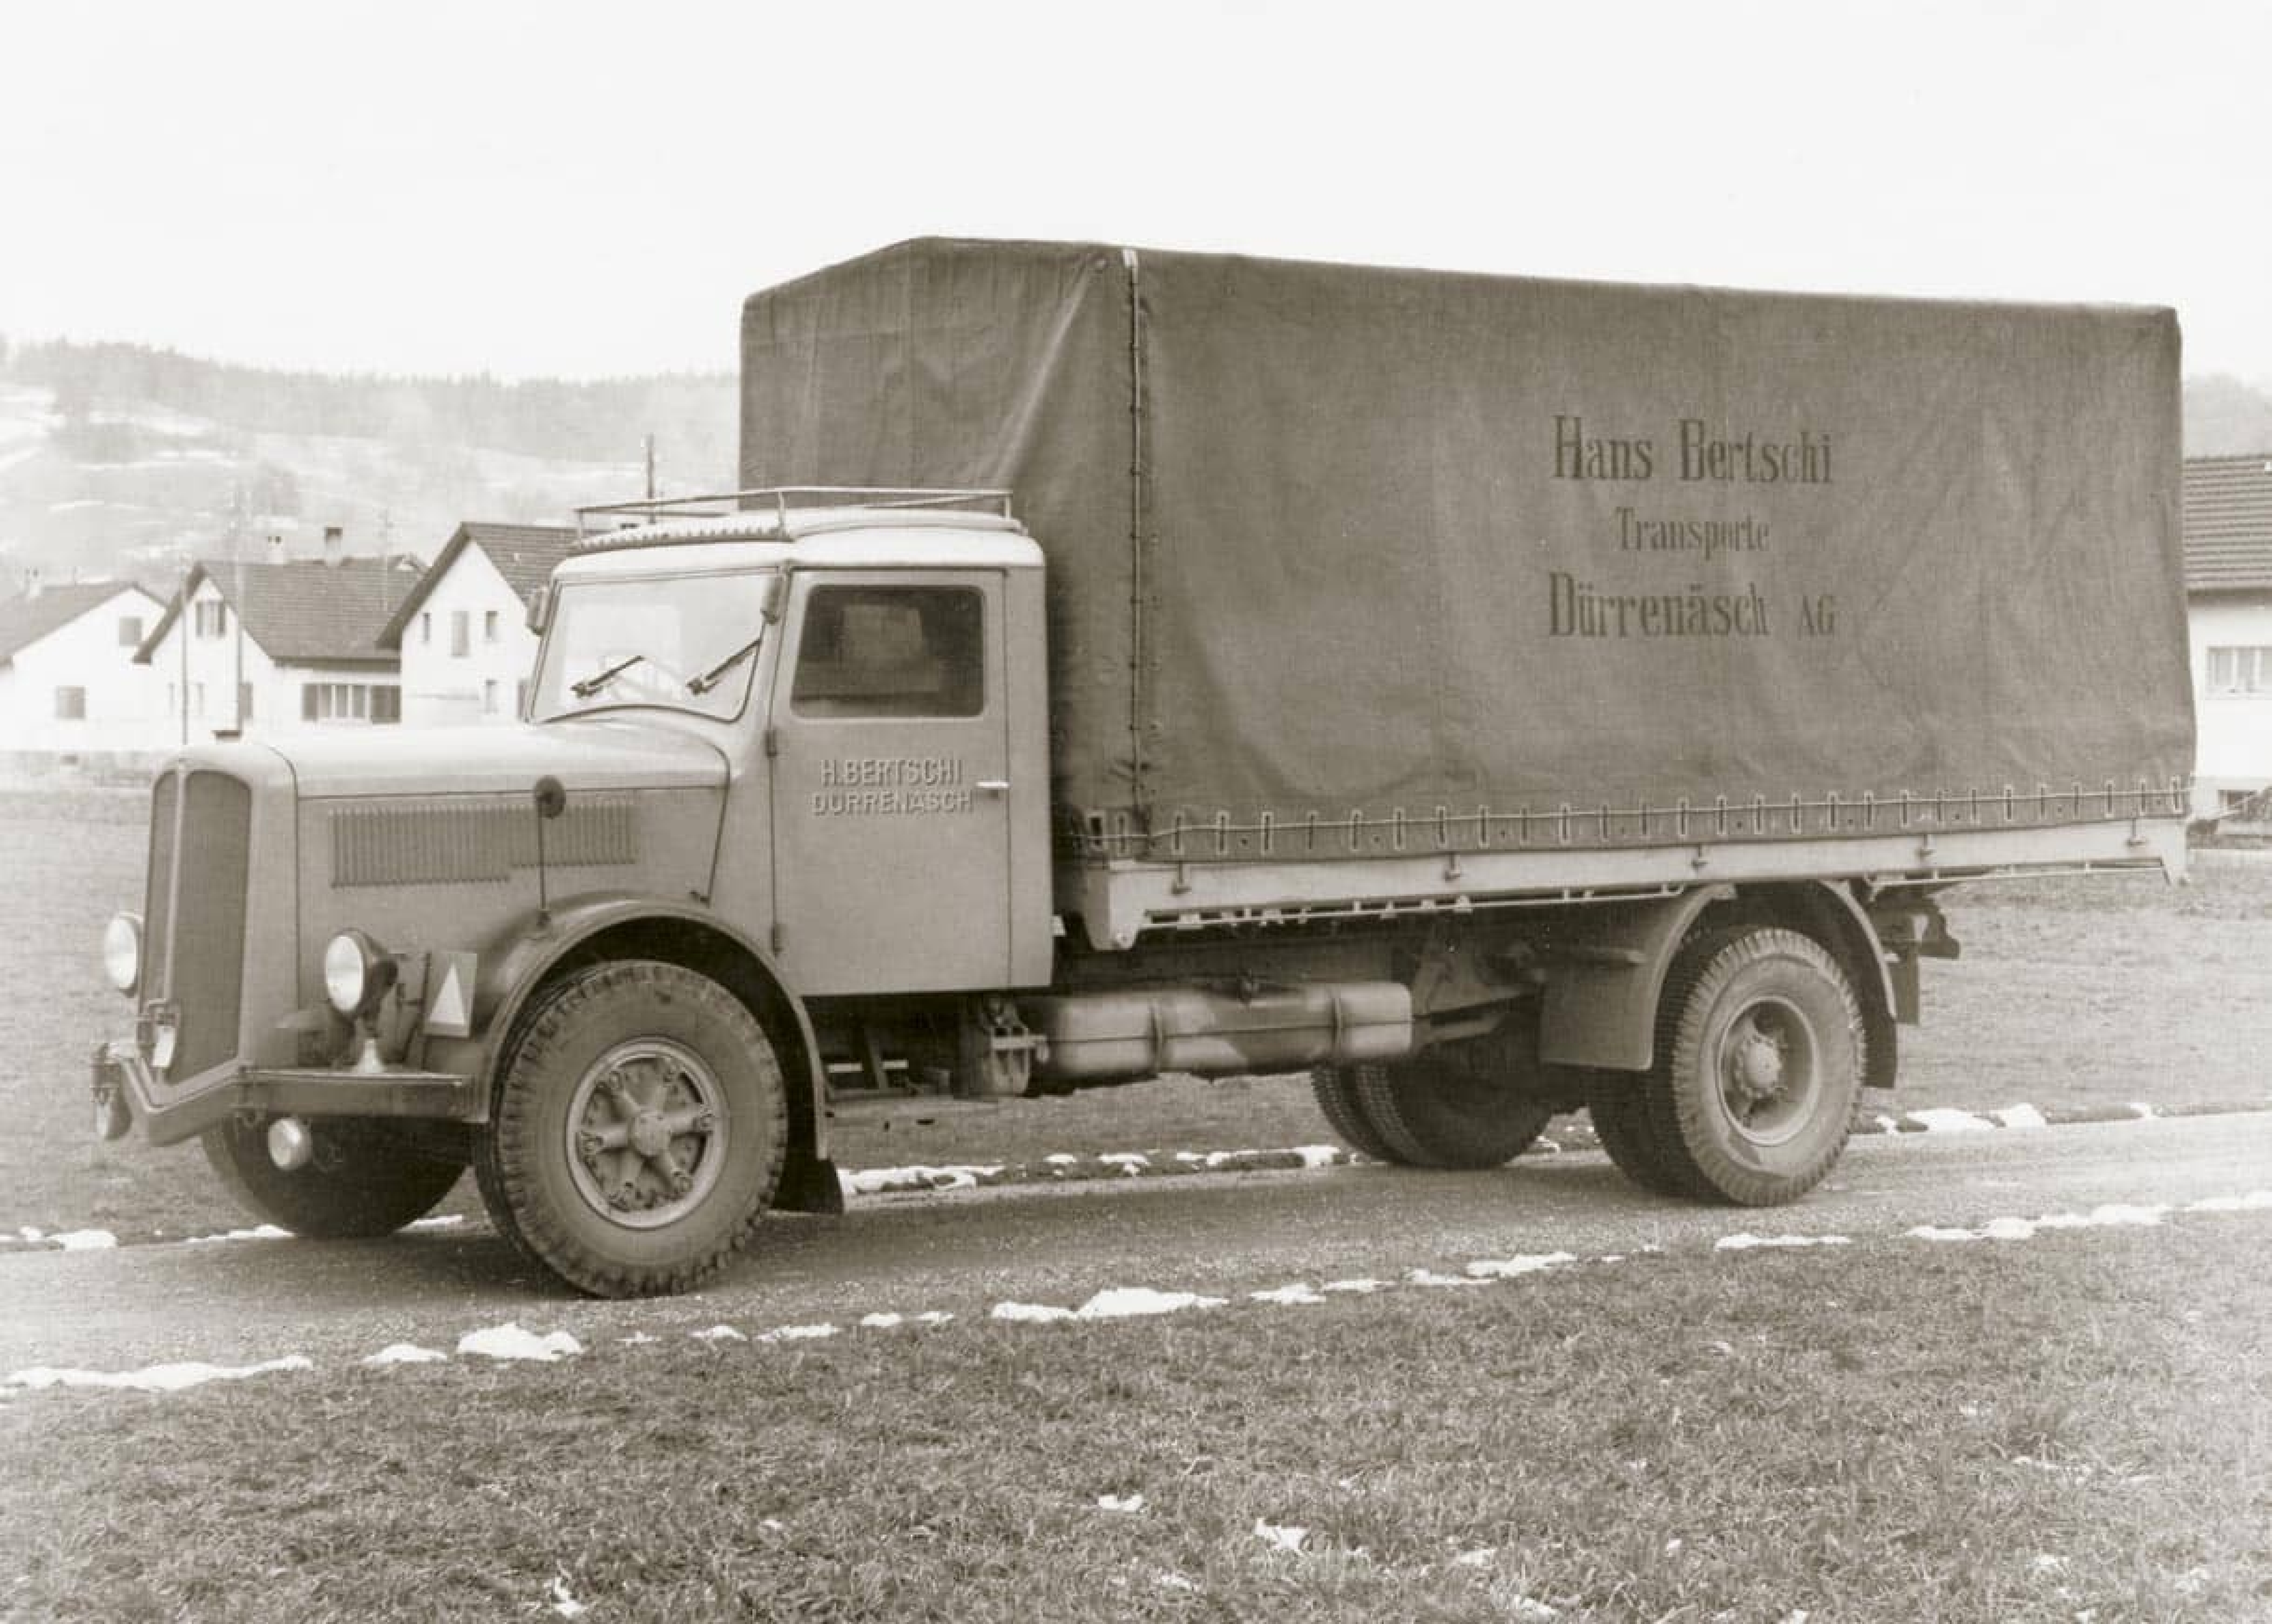 The first ever Bertschi Truck in black and white.